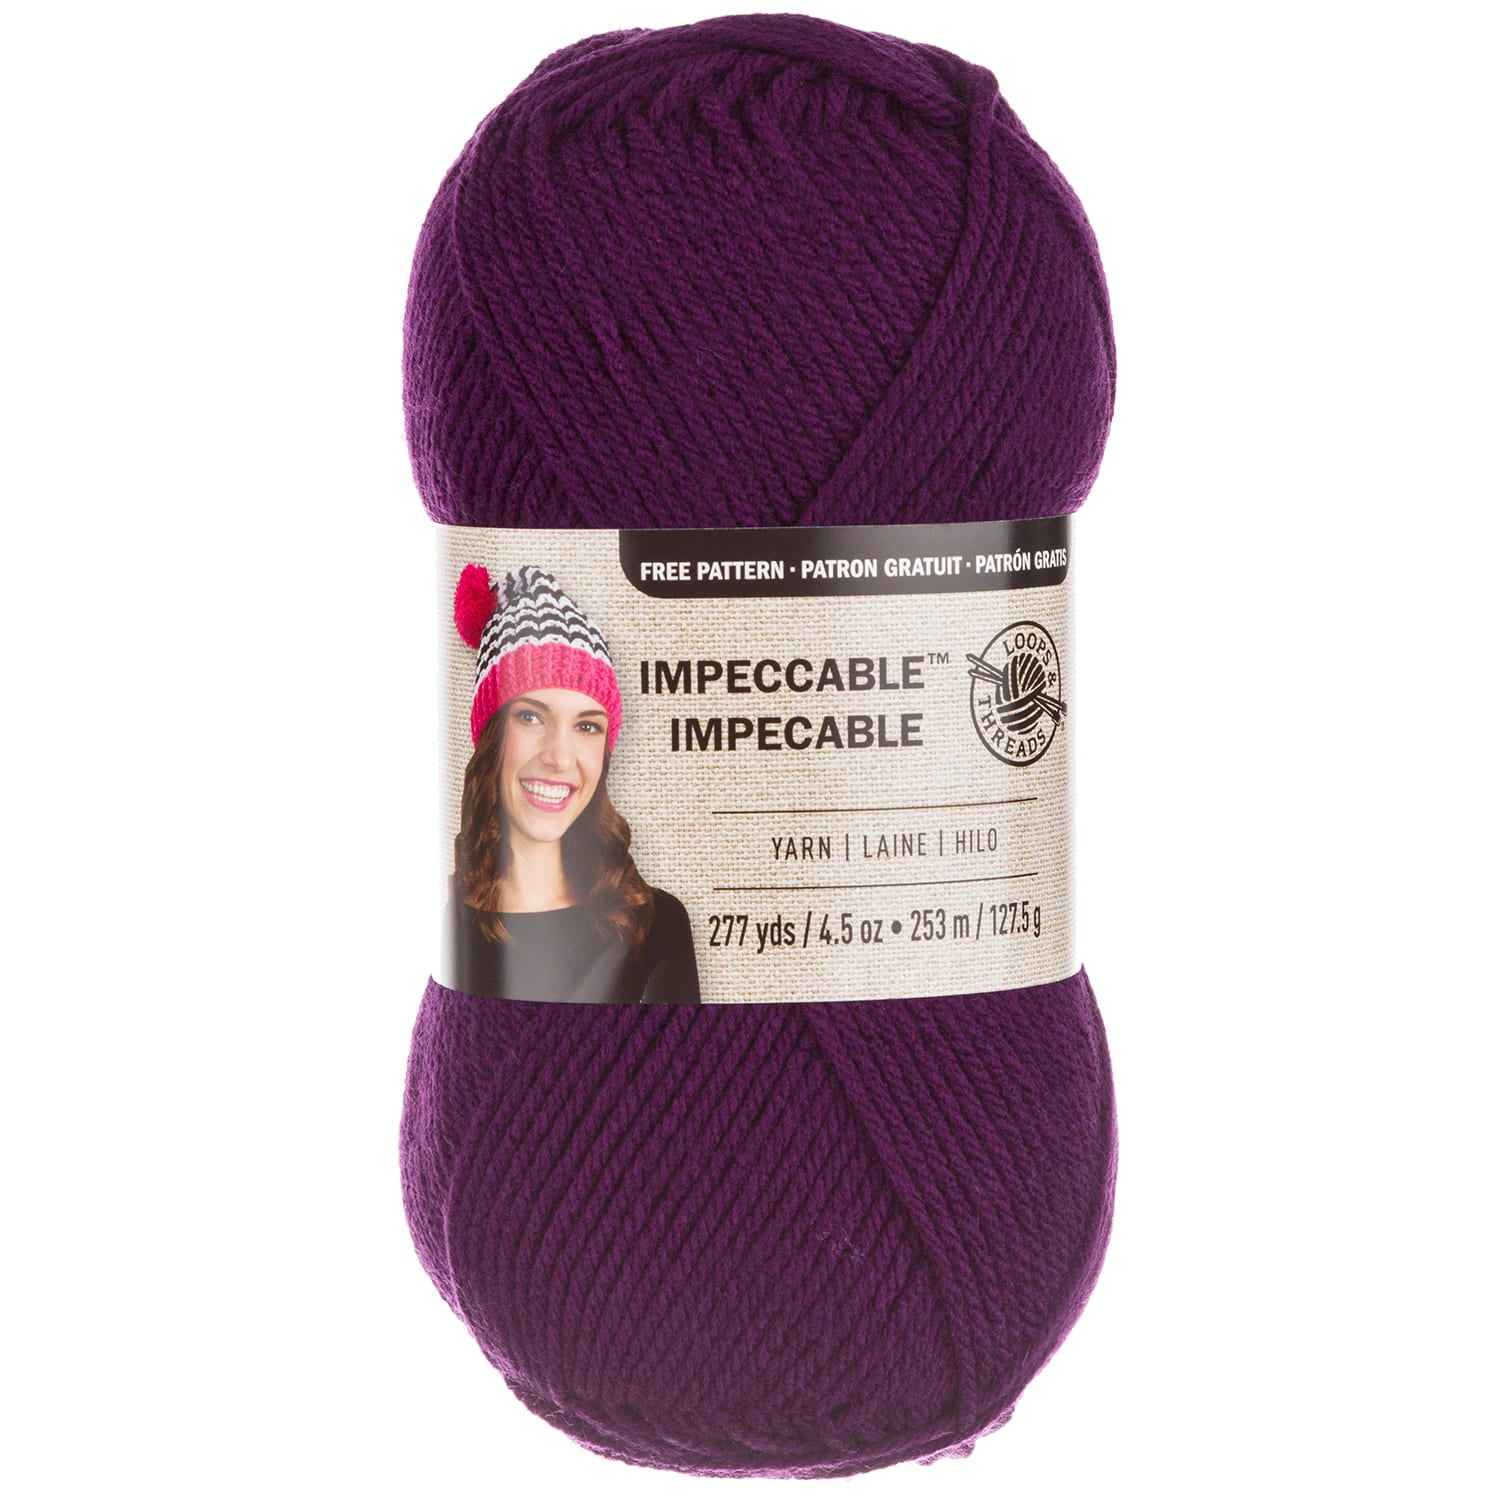 Shop for the Polyester Classic Fiber Fill by Loops & Threads™ at Michaels